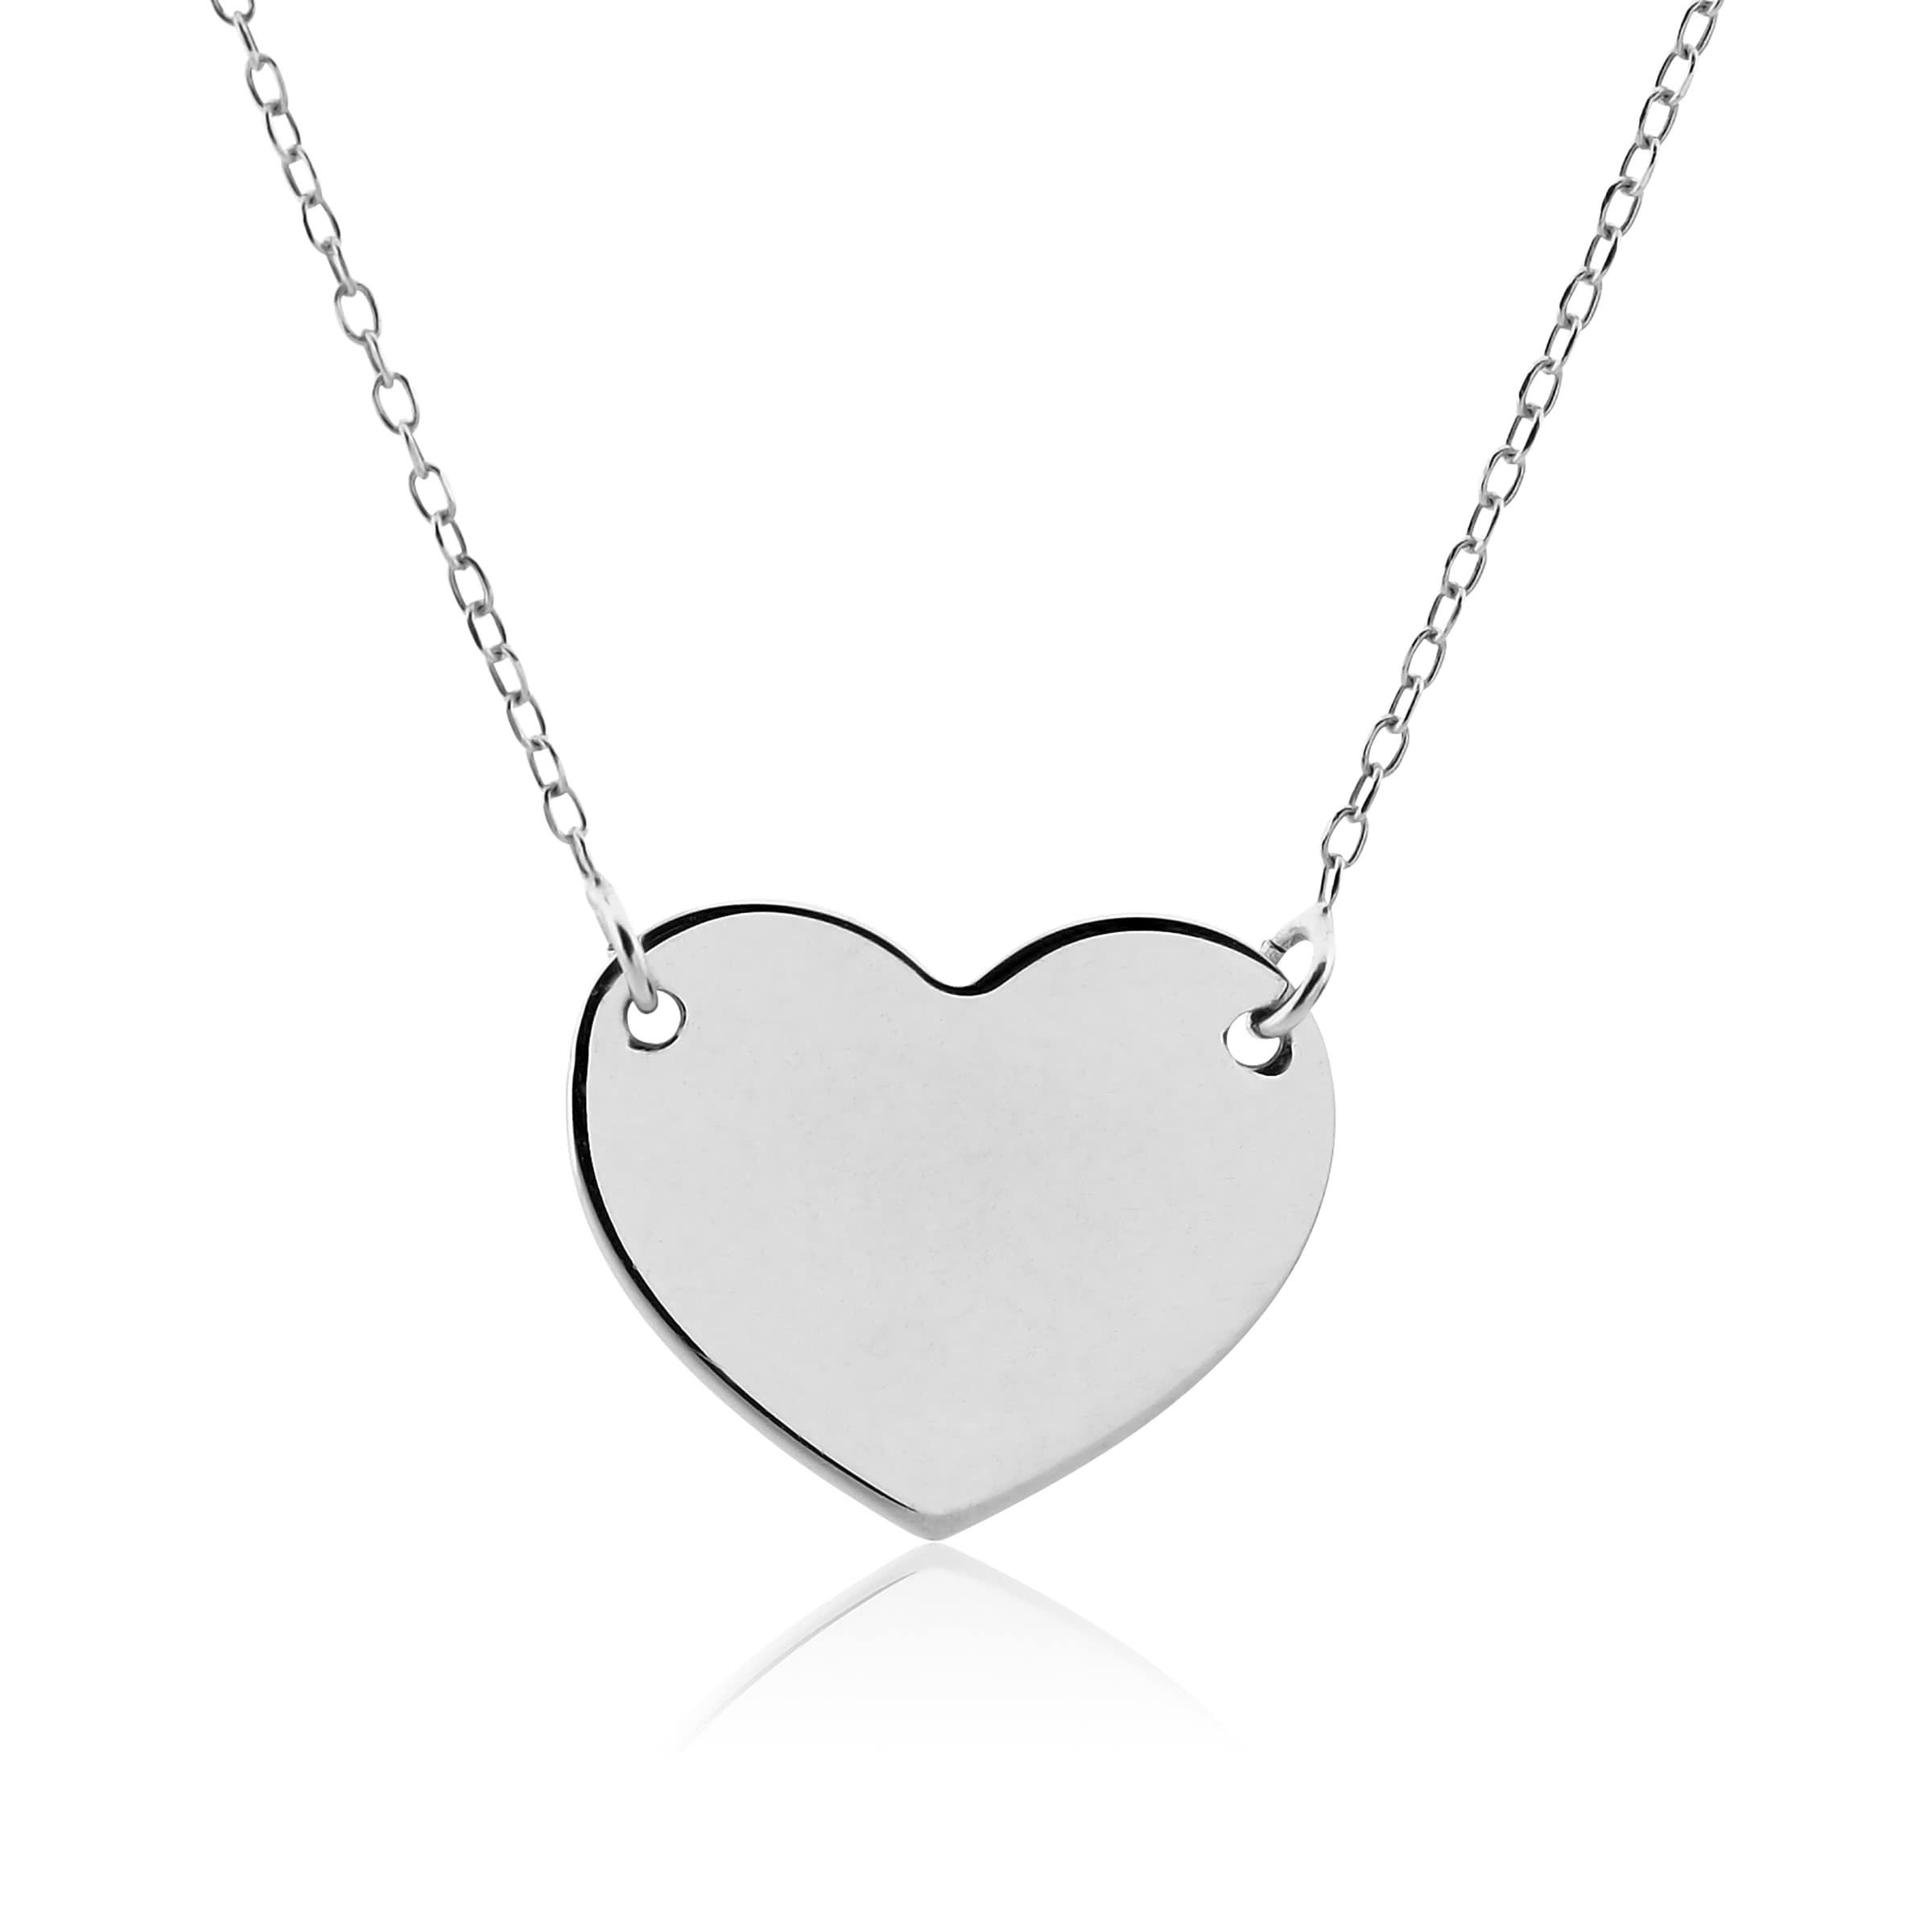 18ct White Gold Heart Shape Necklace | Cerrone Jewellers